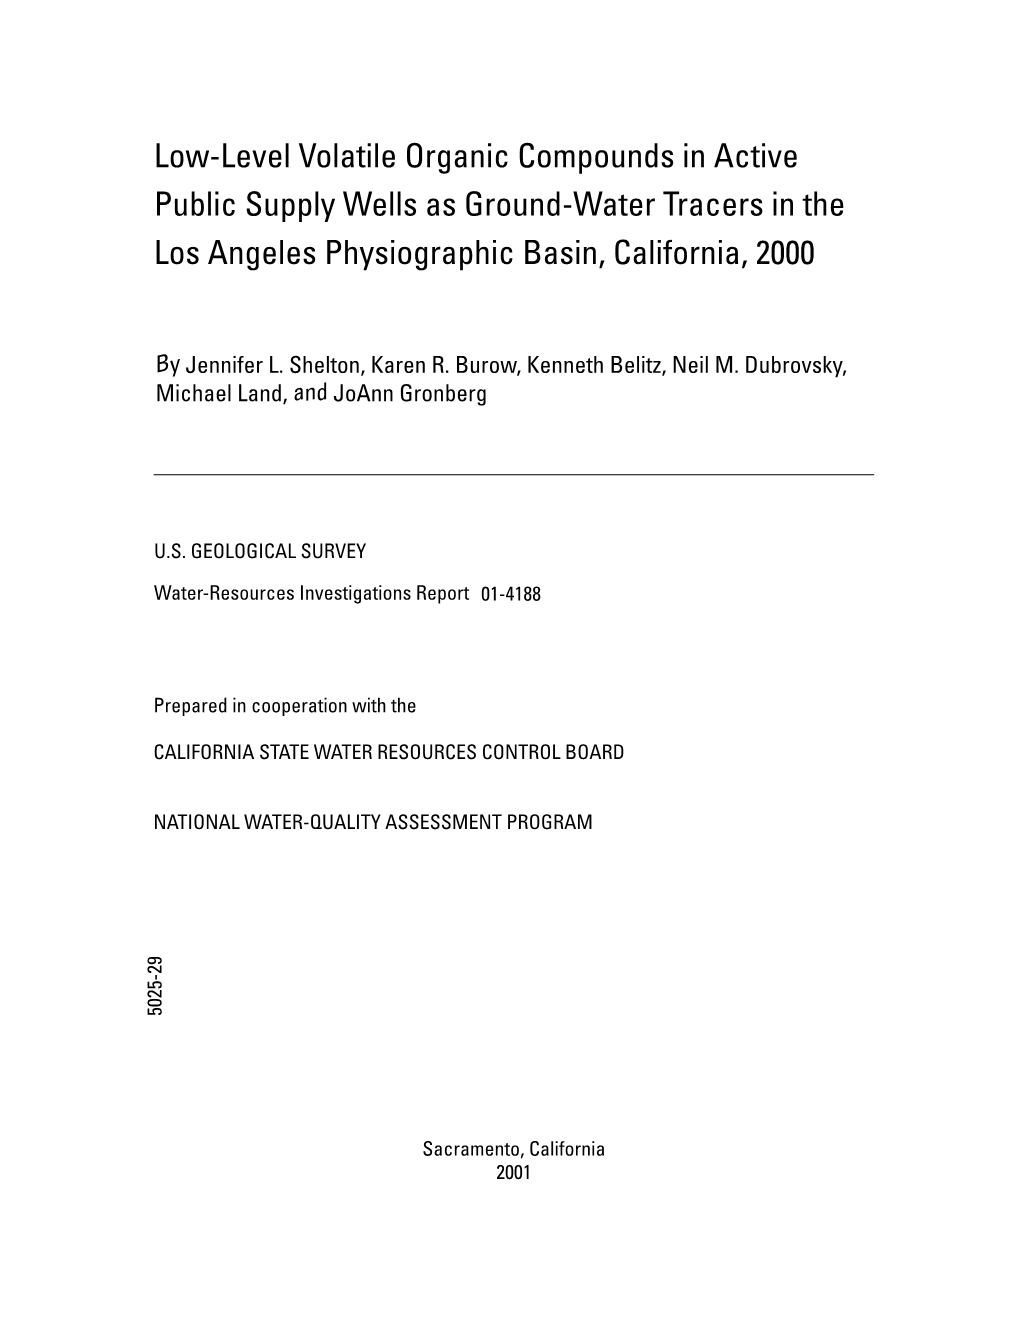 Low-Level Volatile Organic Compounds in Active Public Supply Wells As Ground-Water Tracers in the Los Angeles Physiographic Basin, California, 2000